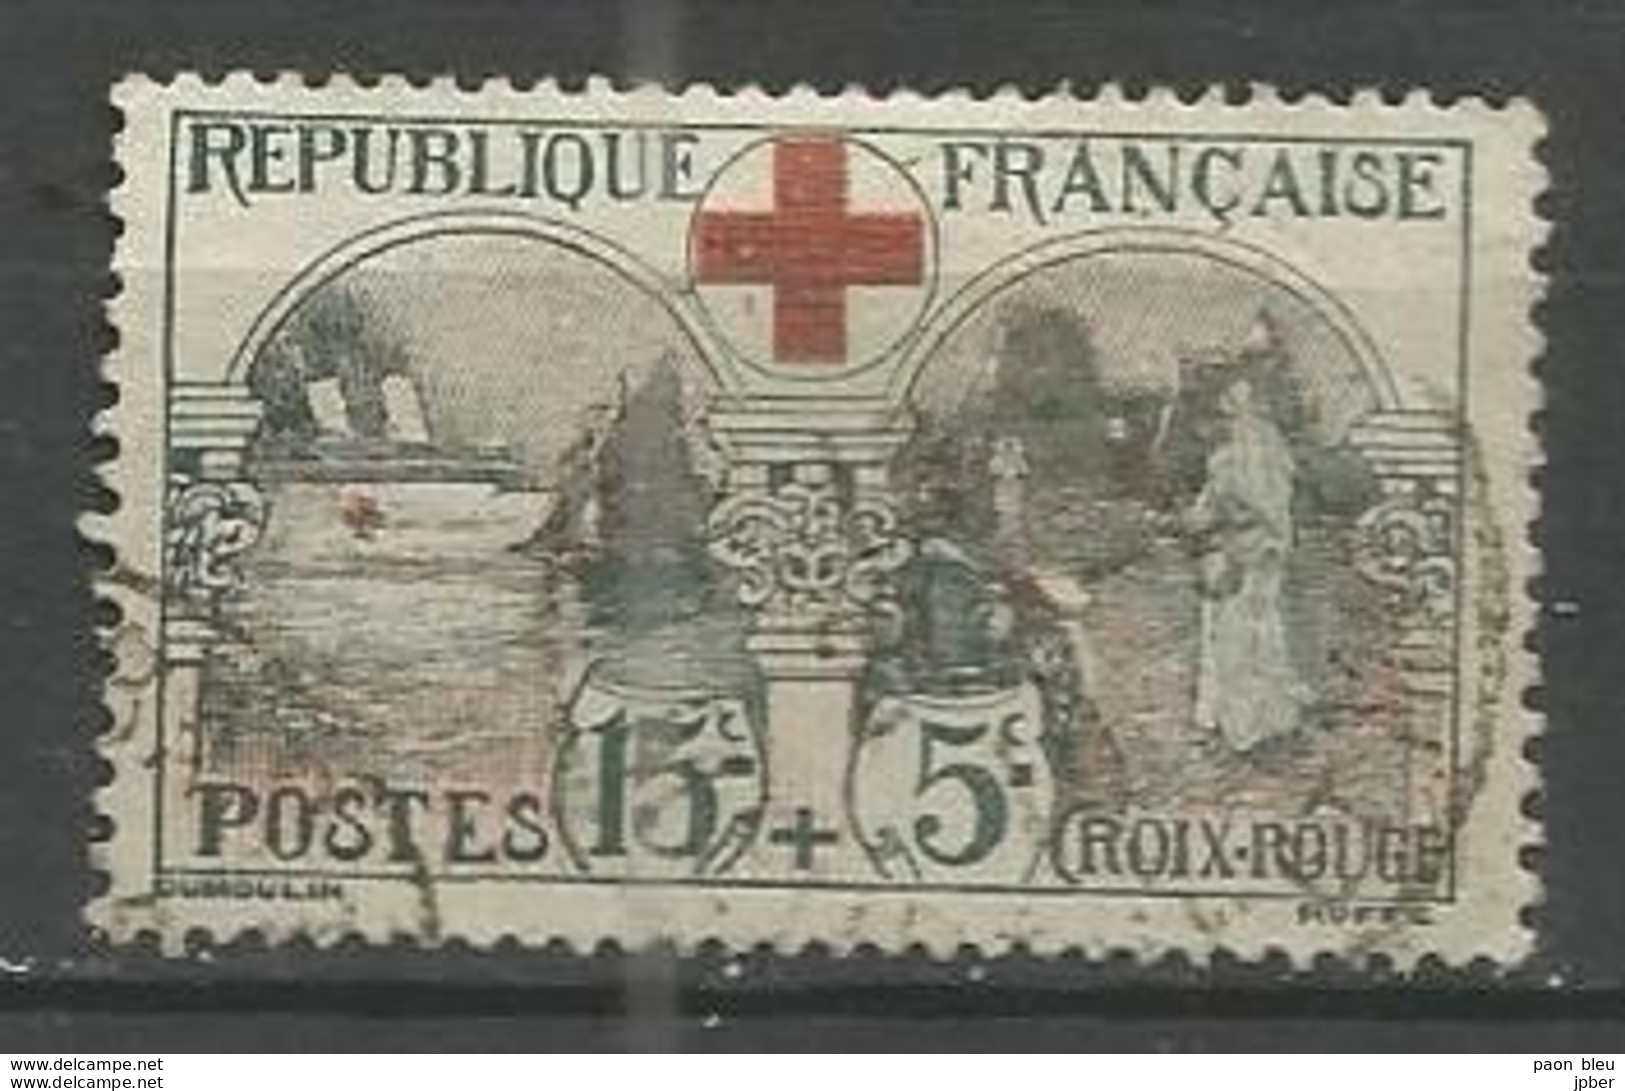 France - Croix-Rouge N°156 - Used Stamps